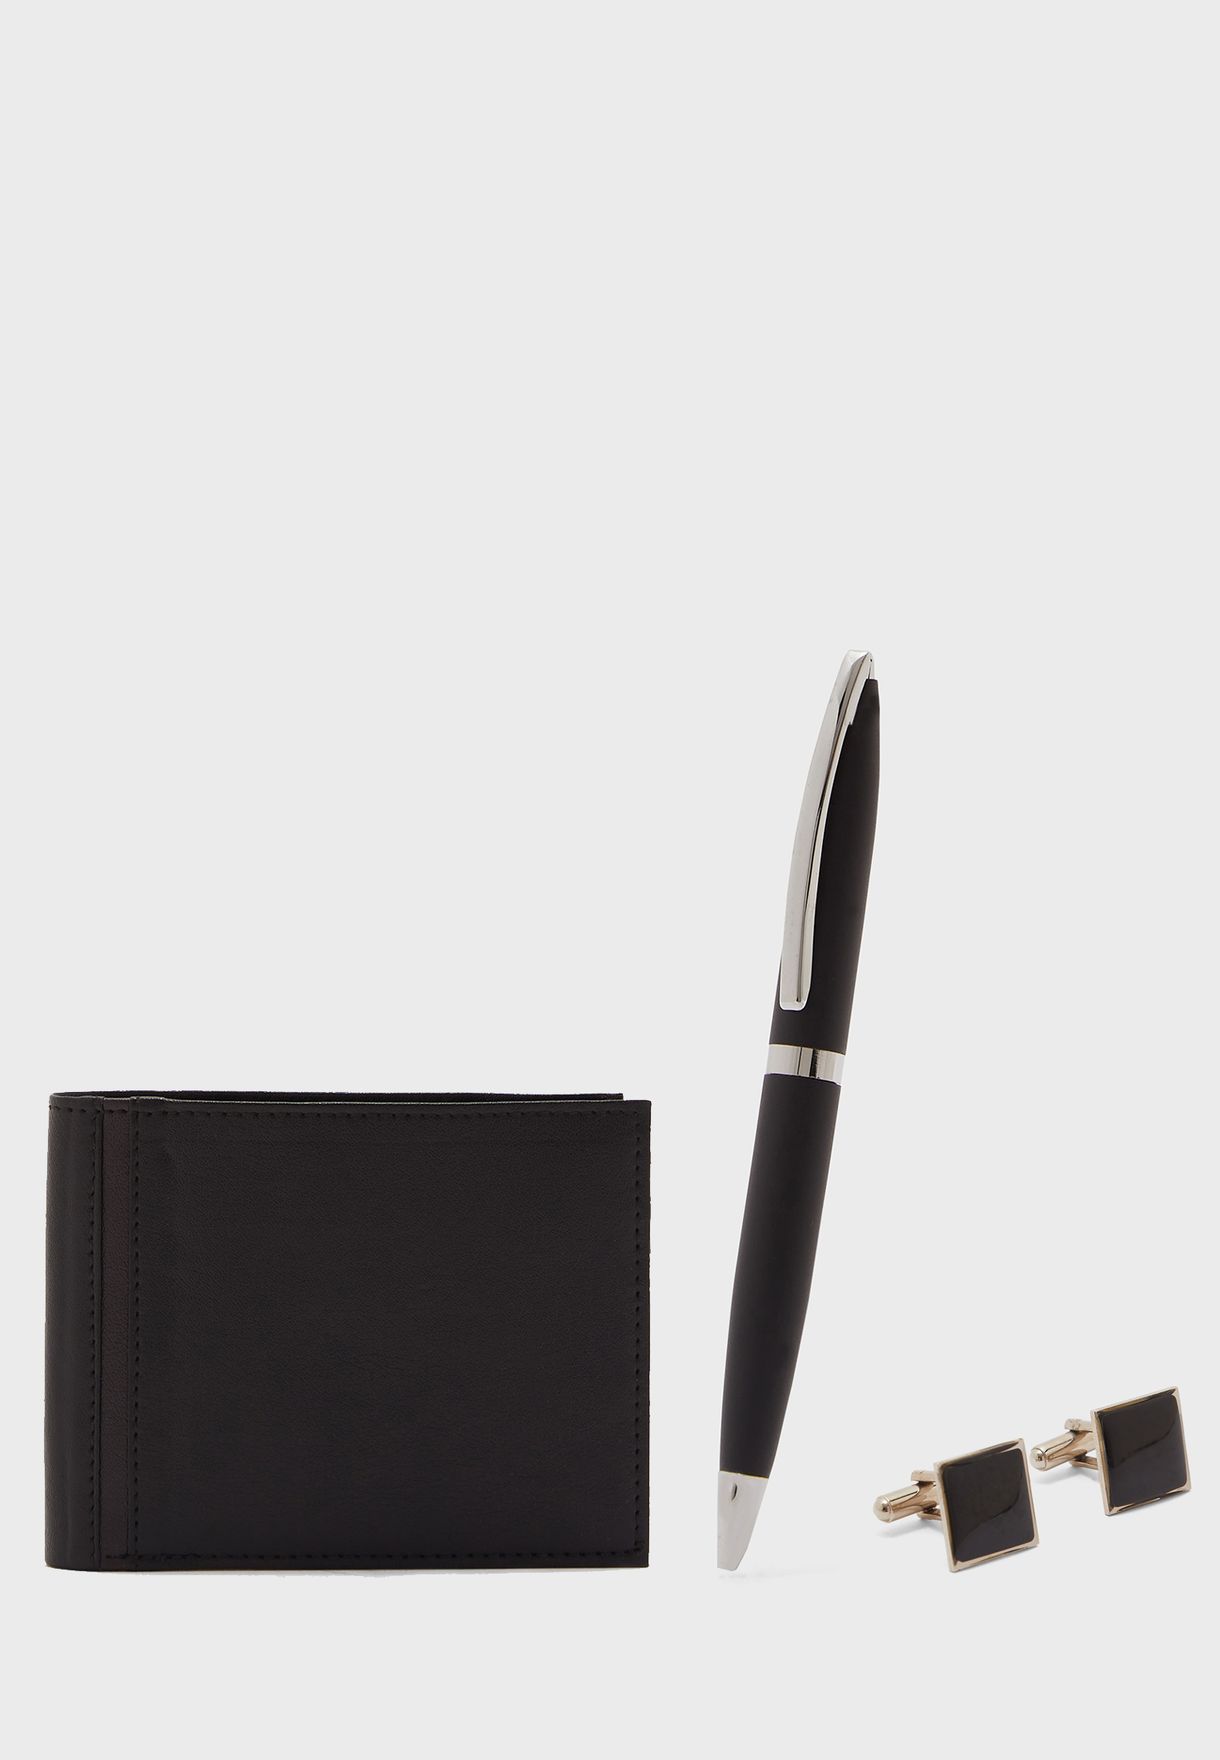 Wallet, Pen And Cuff Link Gifting Set